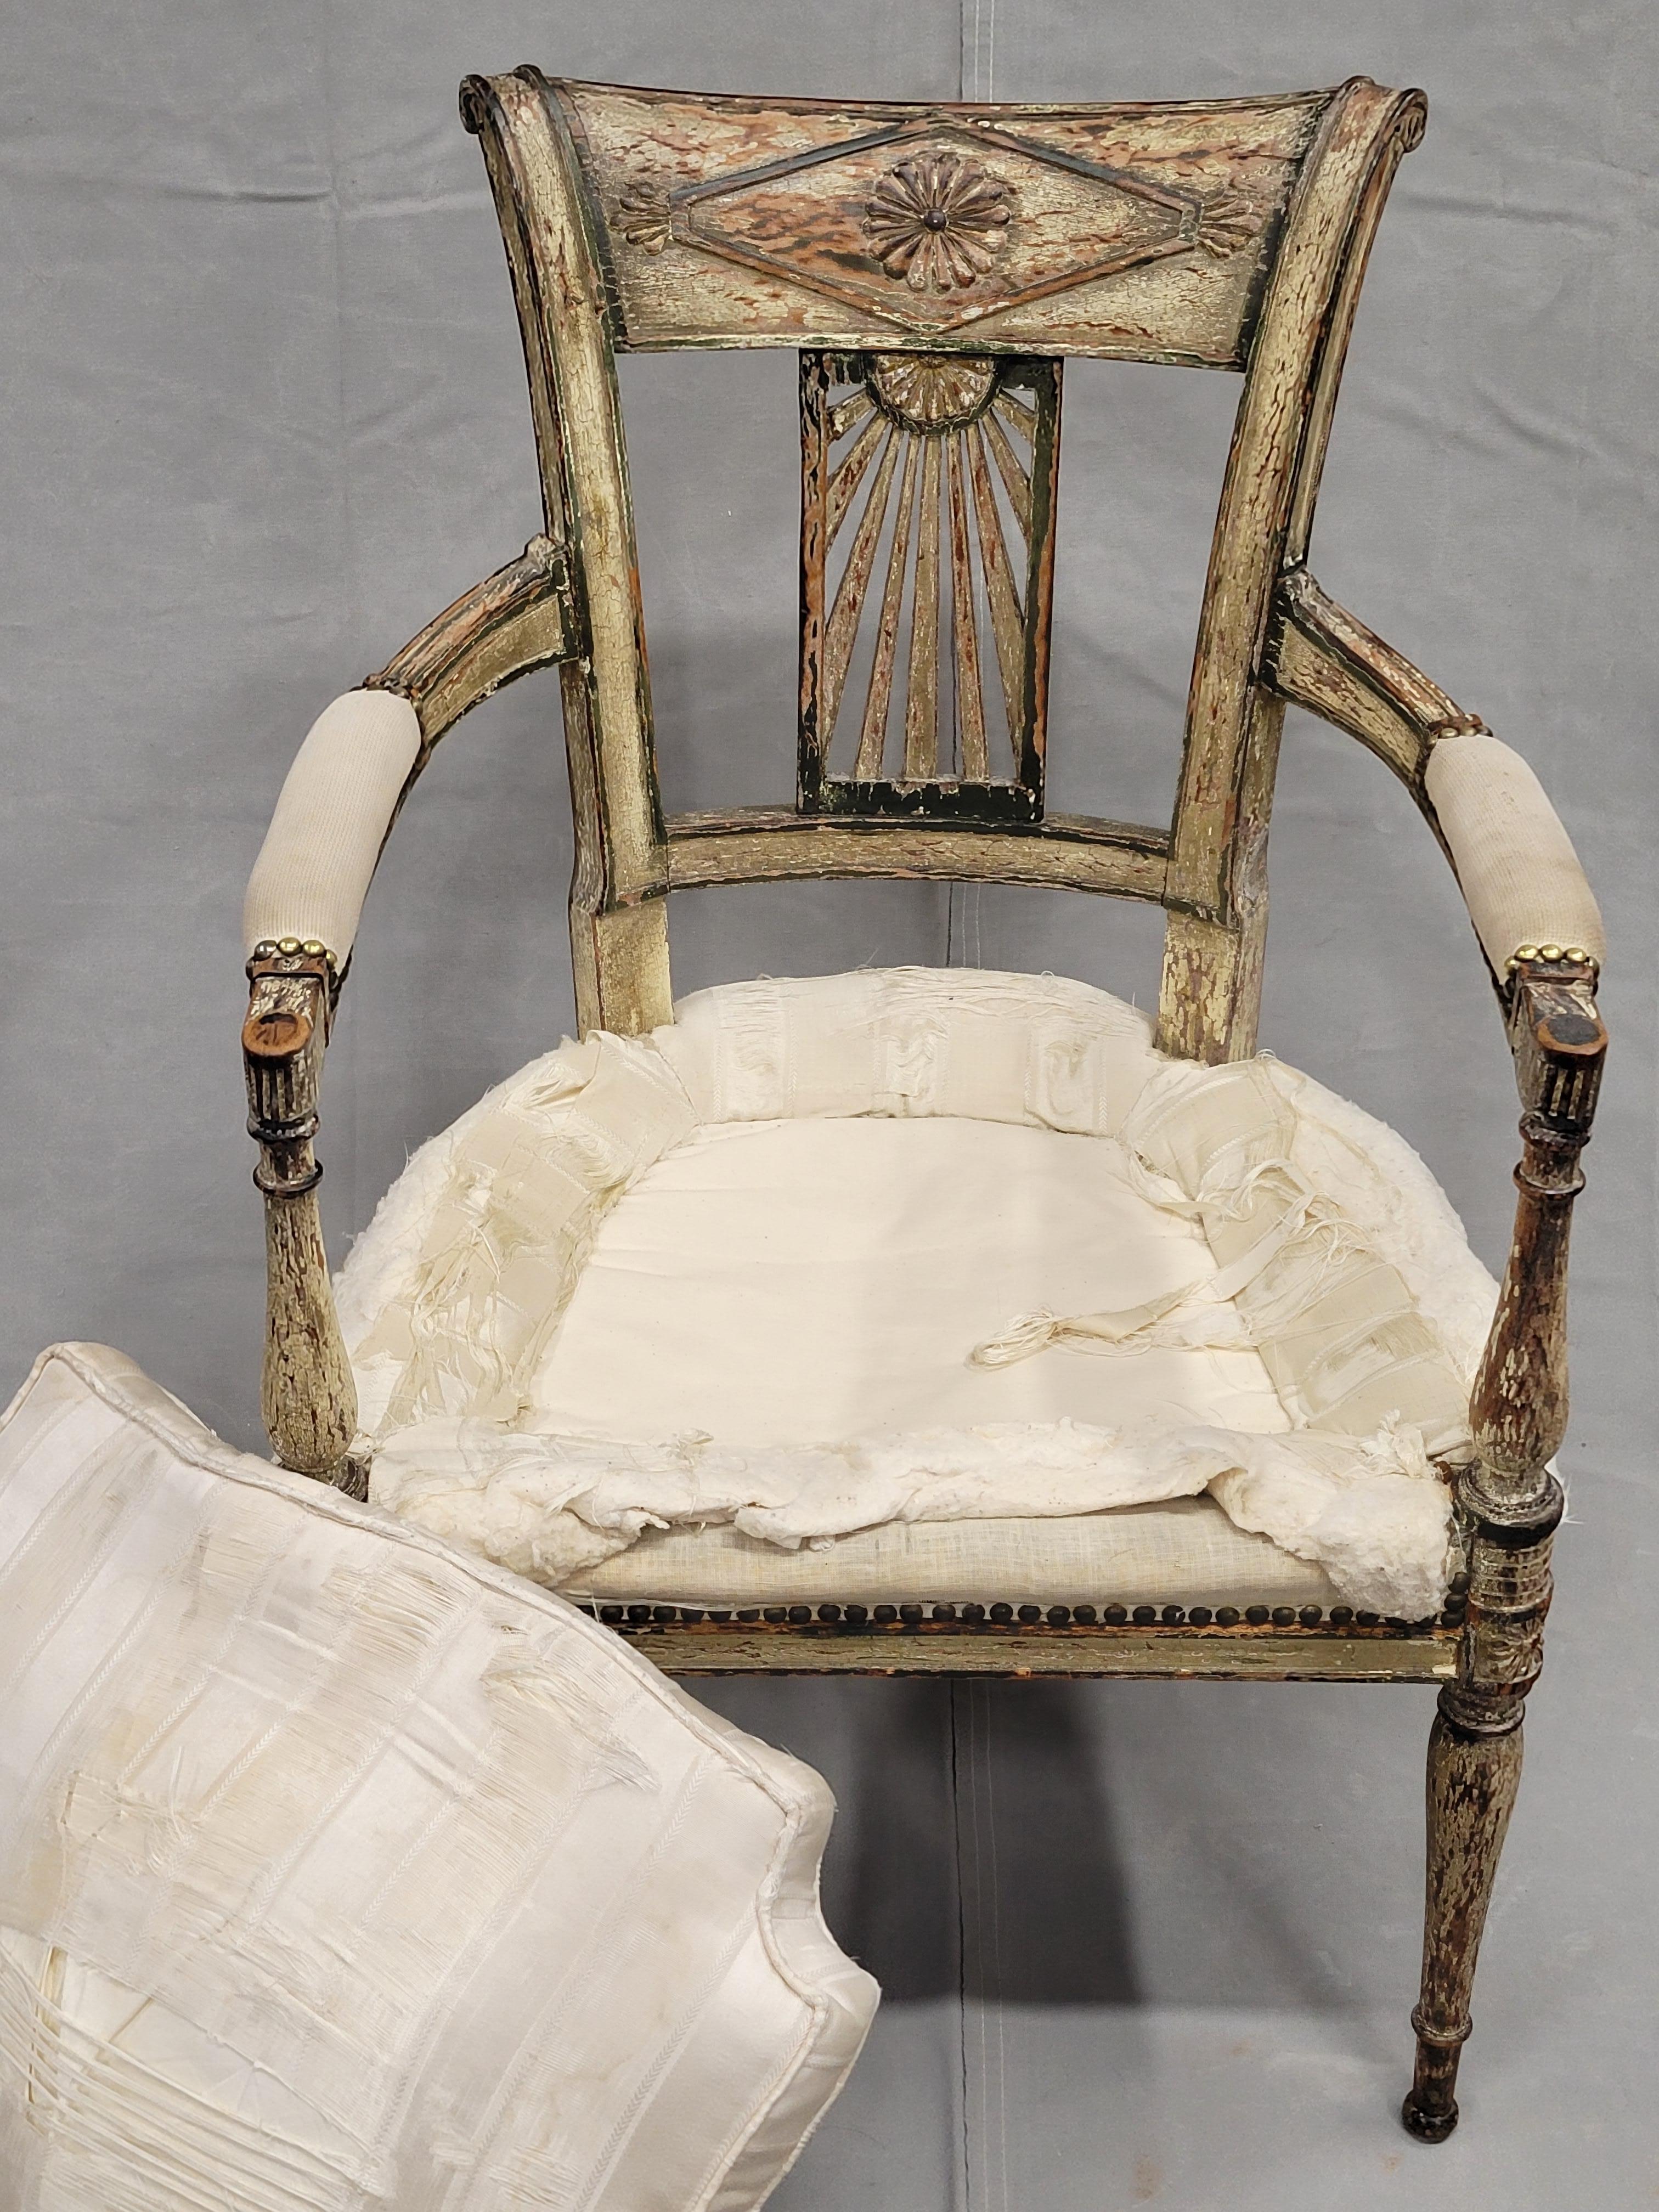 Antique Maison Jansen Style French Louis XVI Painted Fauteuil Chairs - a Pair For Sale 3